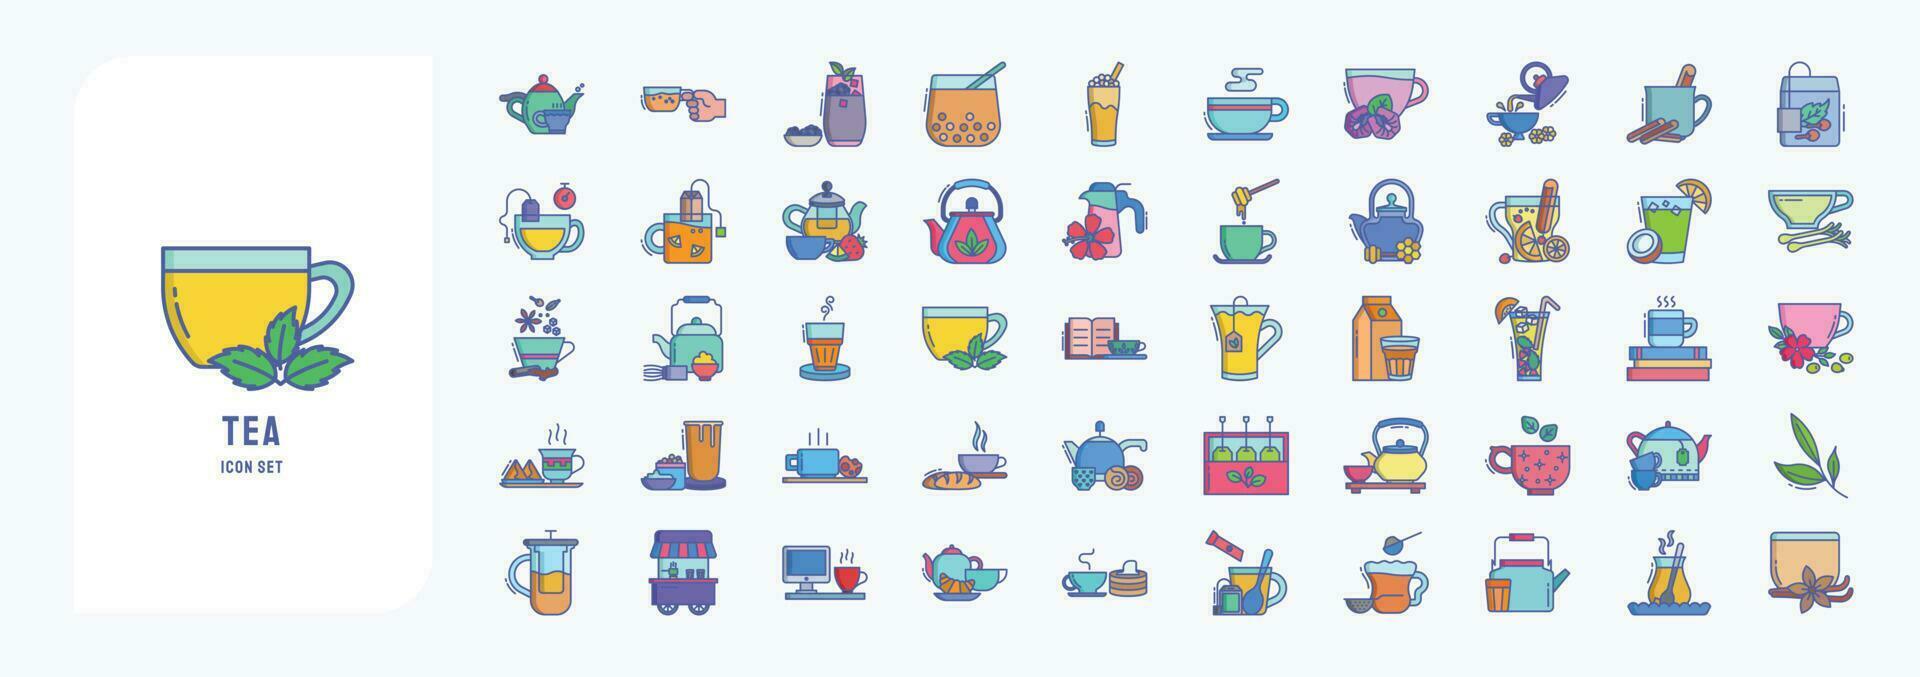 Collection of icons related to Tea, including icons like Black tea, milk, Bubble tea, Green tea and more vector